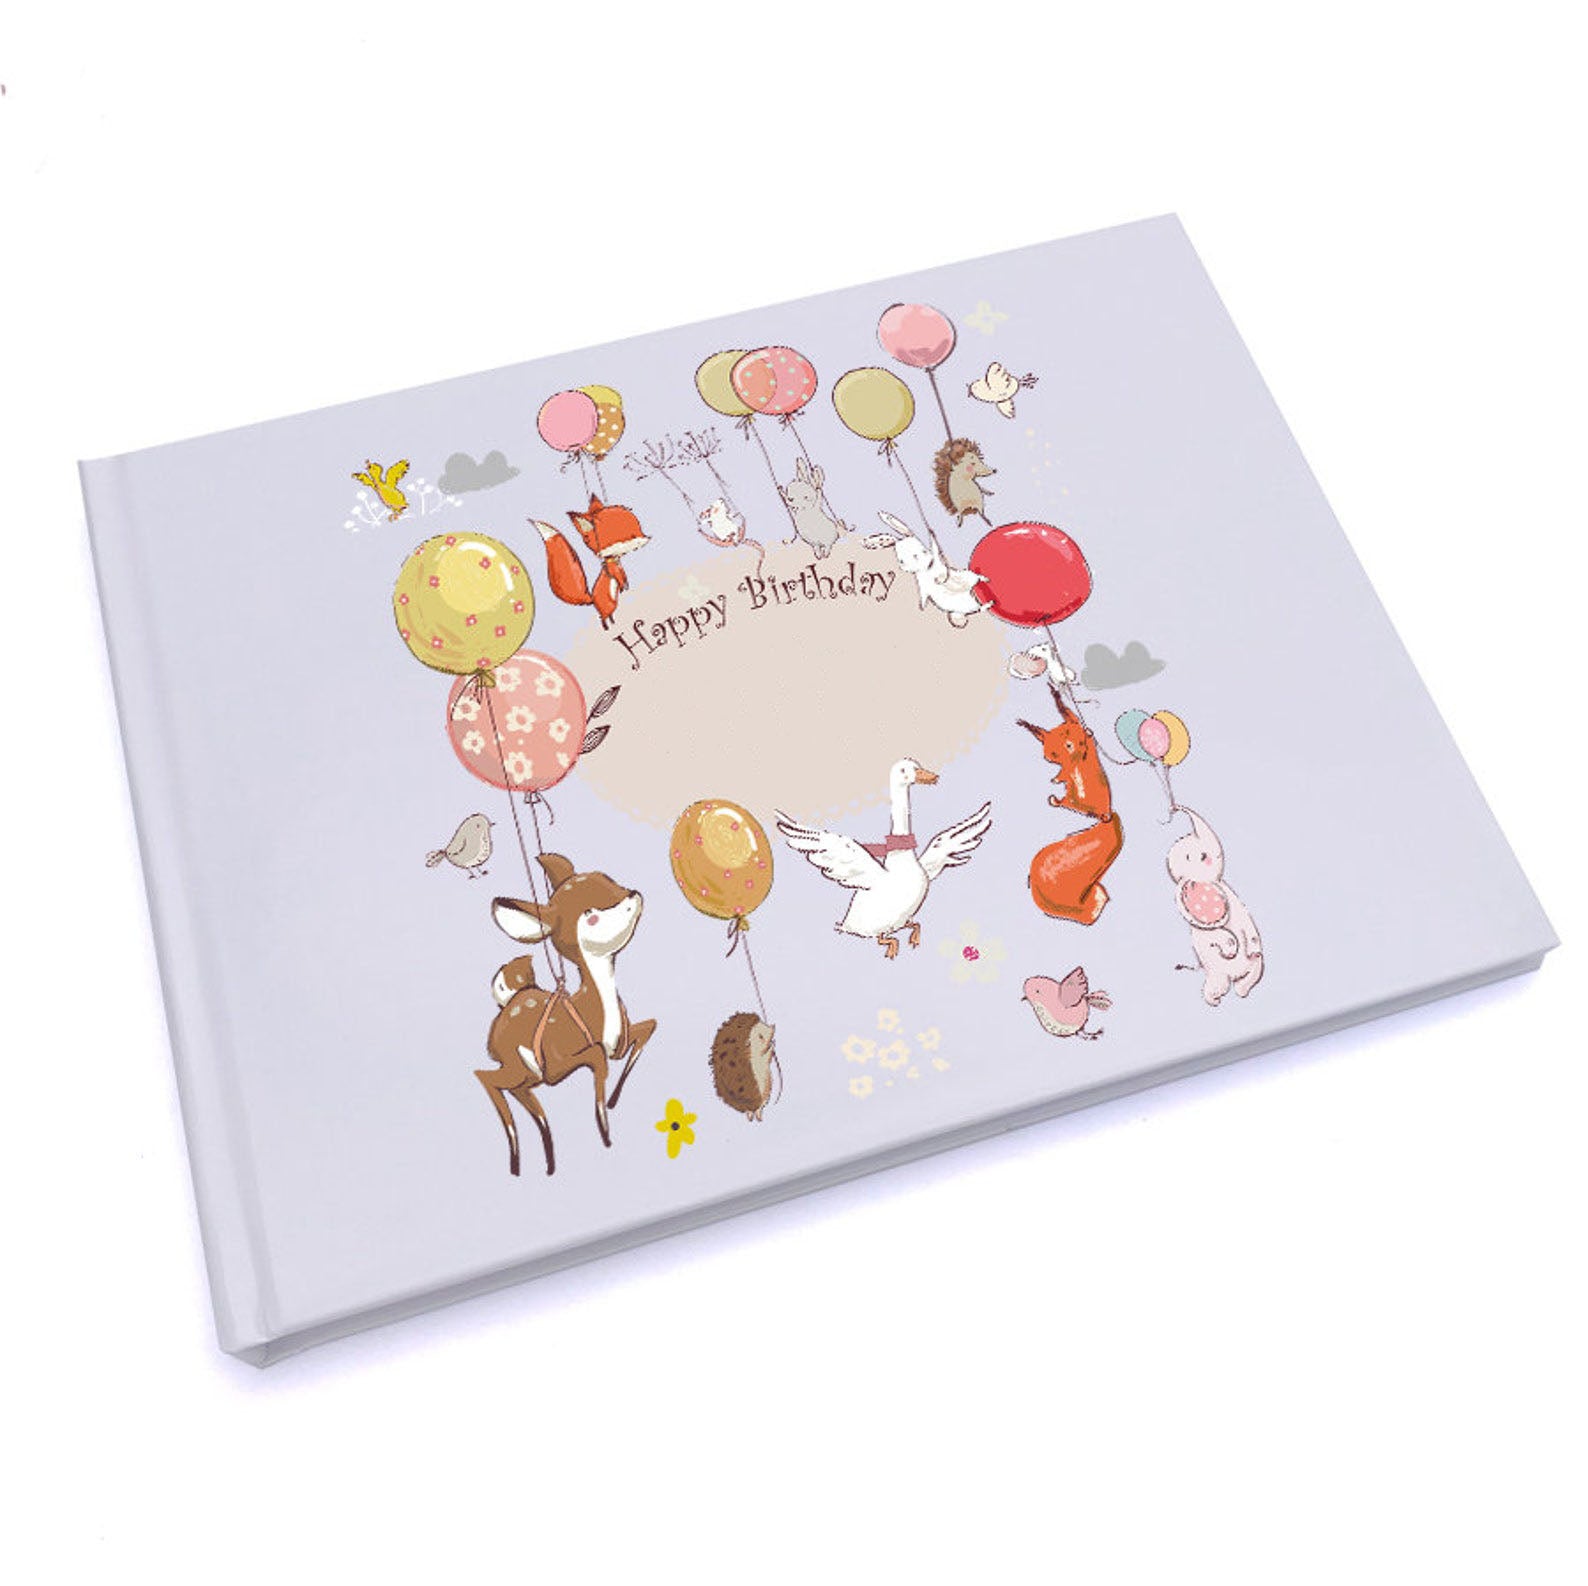 Personalised Happy Birthday Guest Book